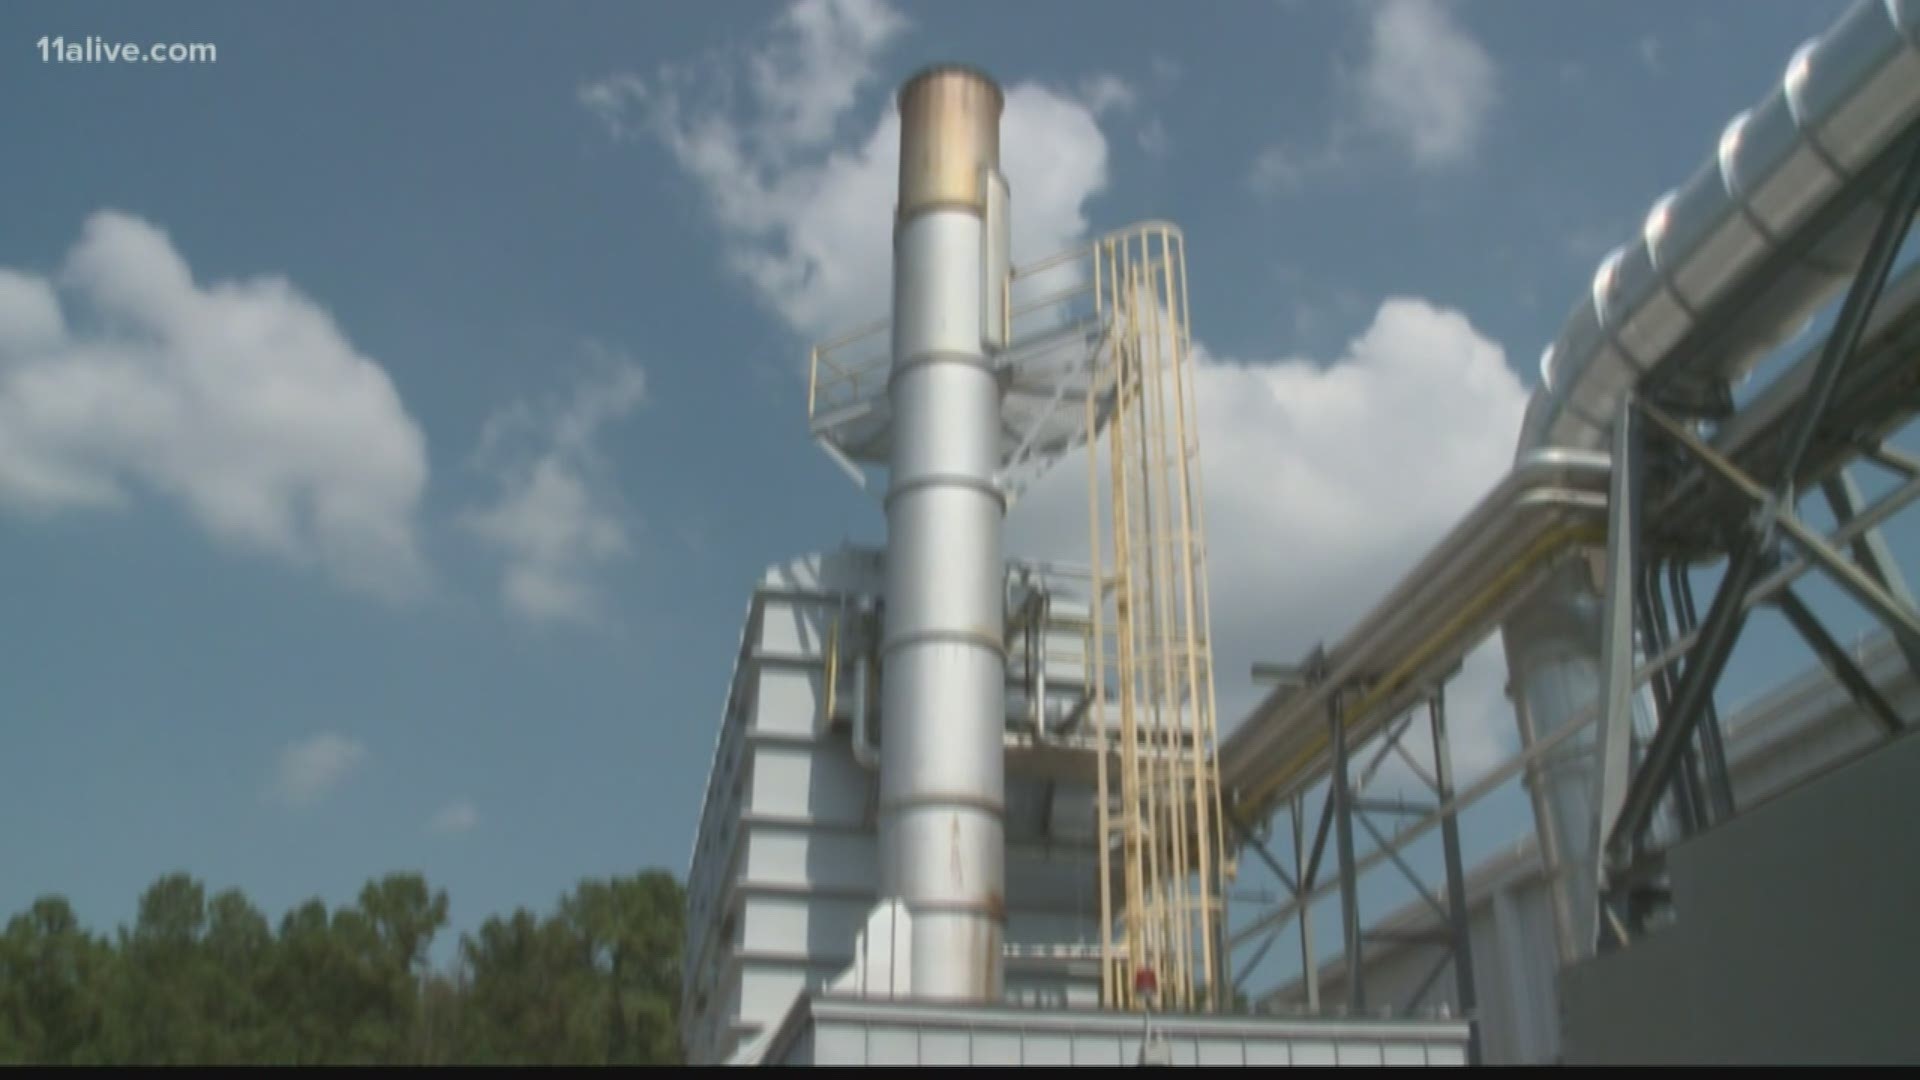 The Covington plant will shut down for a week to allow the EPD to take ambient air monitoring samples in the area when the plant is not in operation.